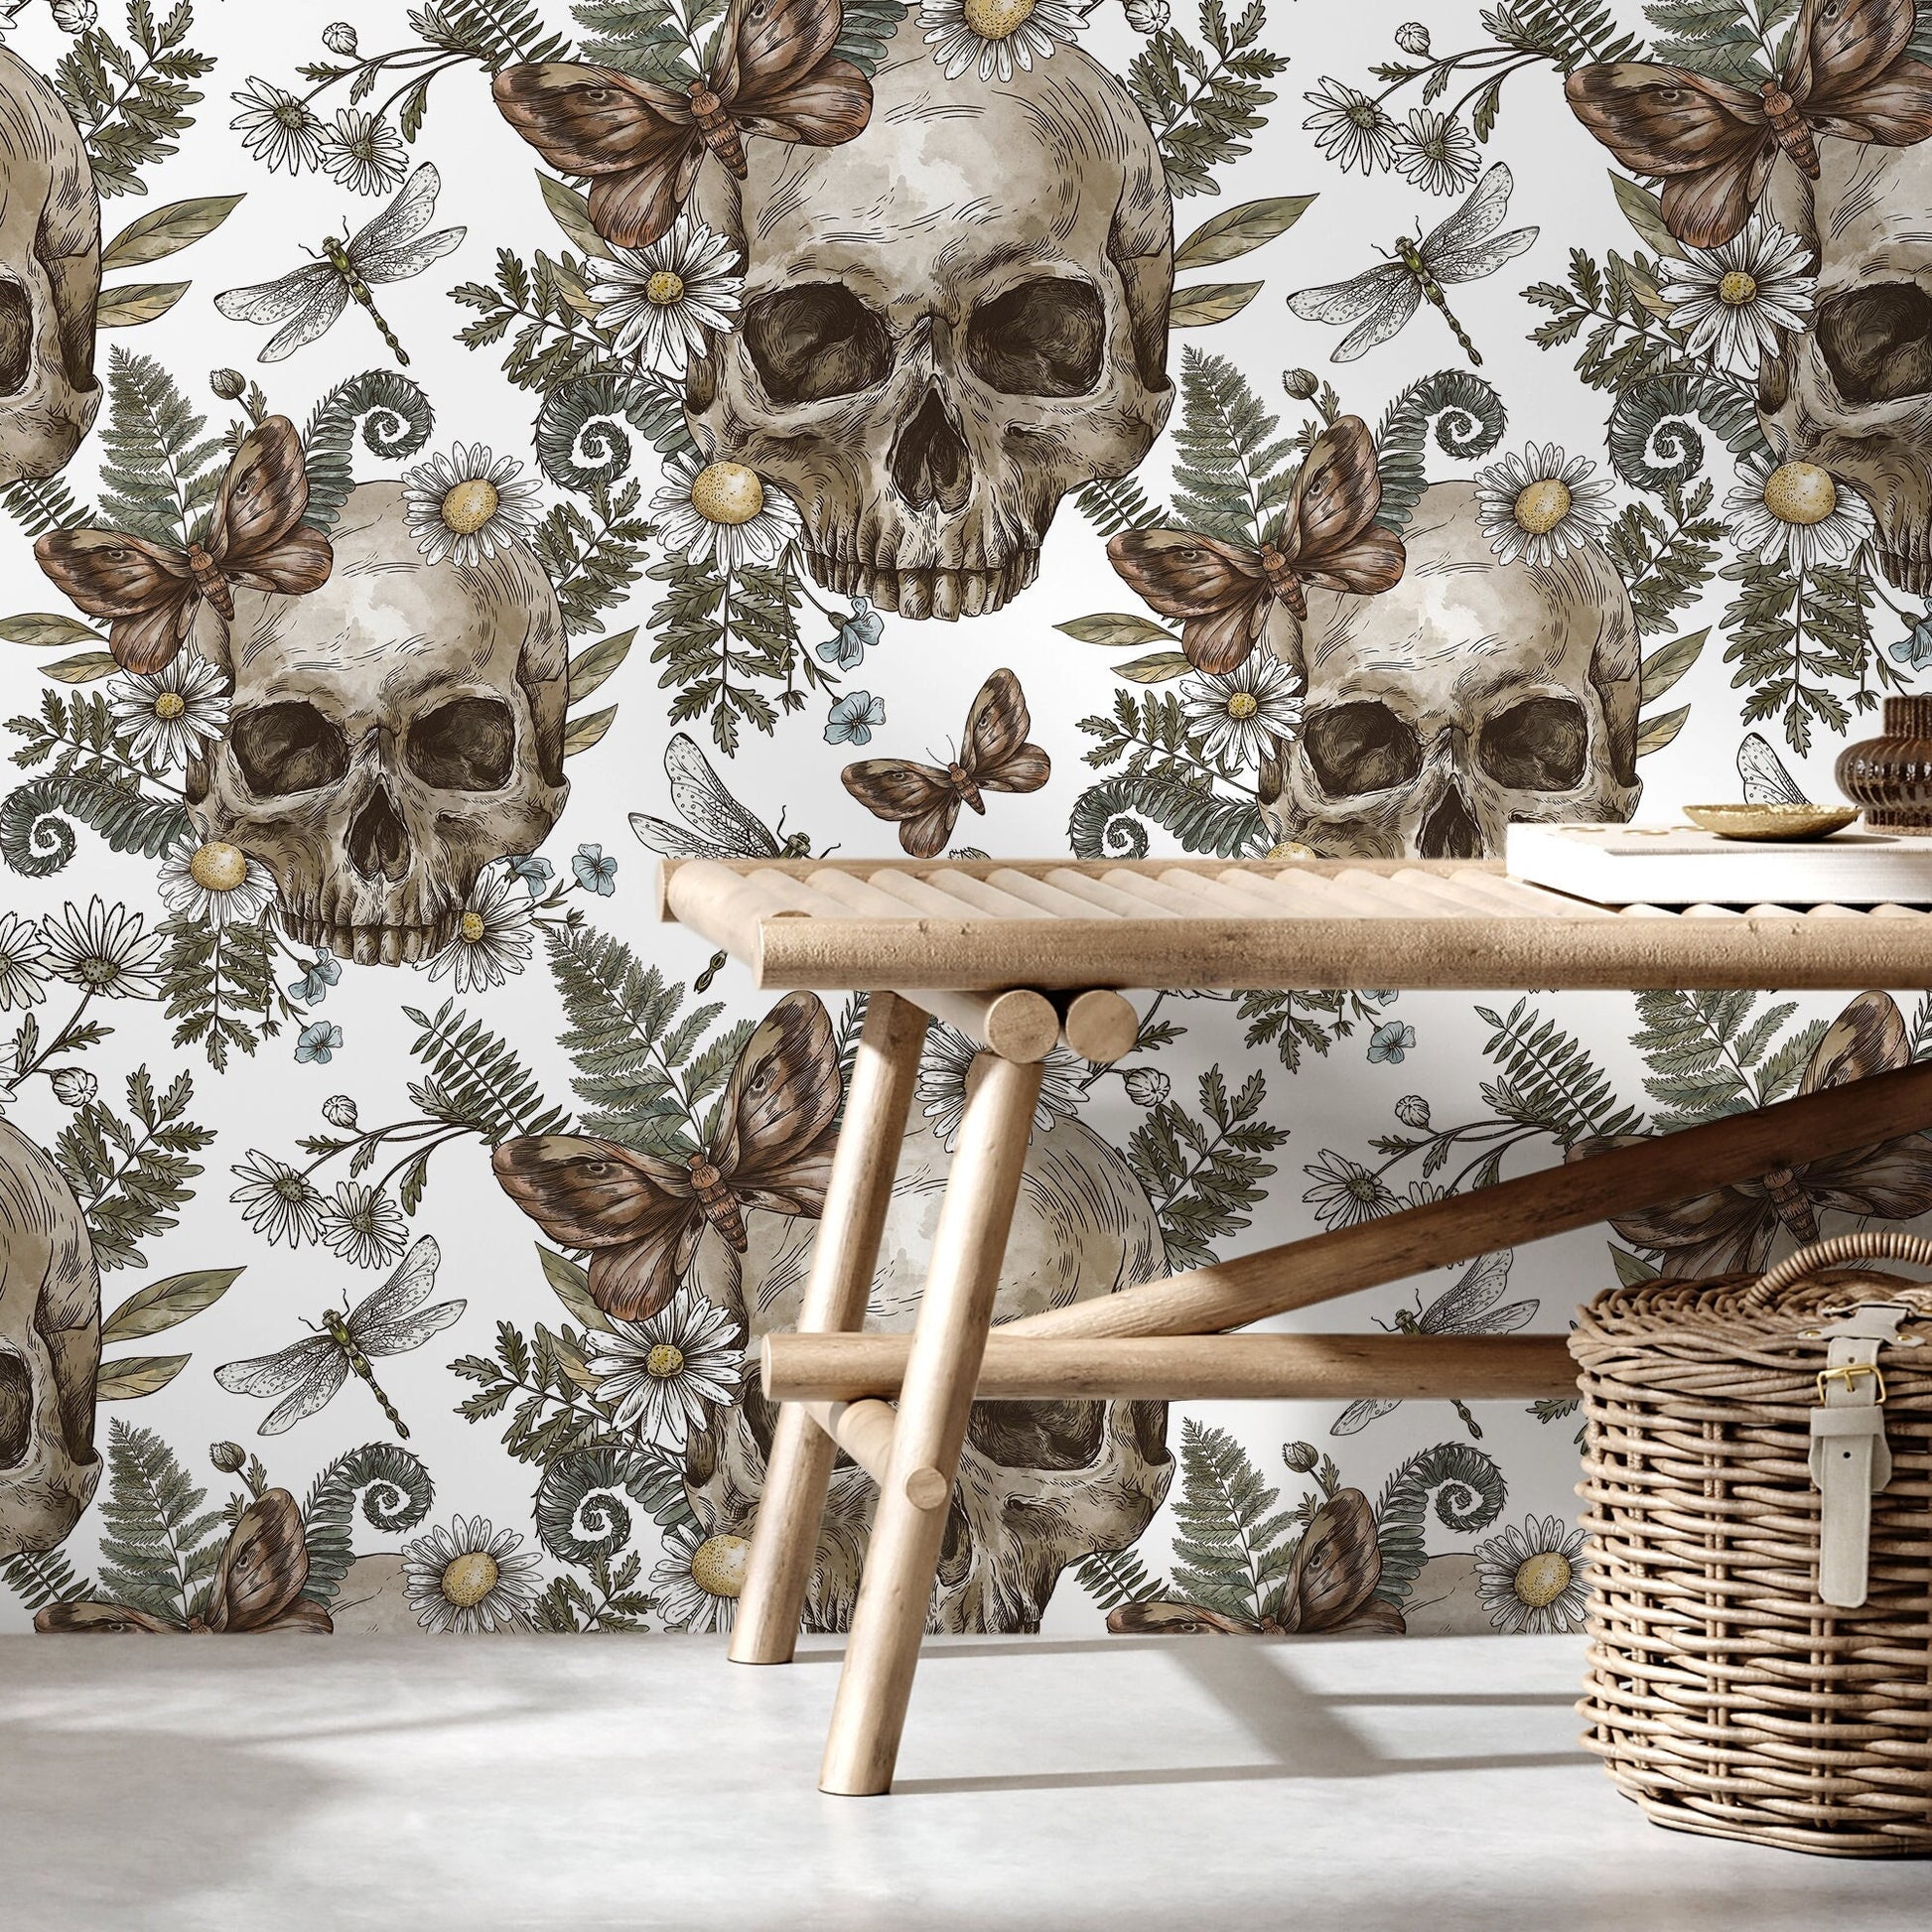 Skulls and Fern Wallpaper Vintage Floral Wallpaper Peel and Stick and Traditional Wallpaper - D828